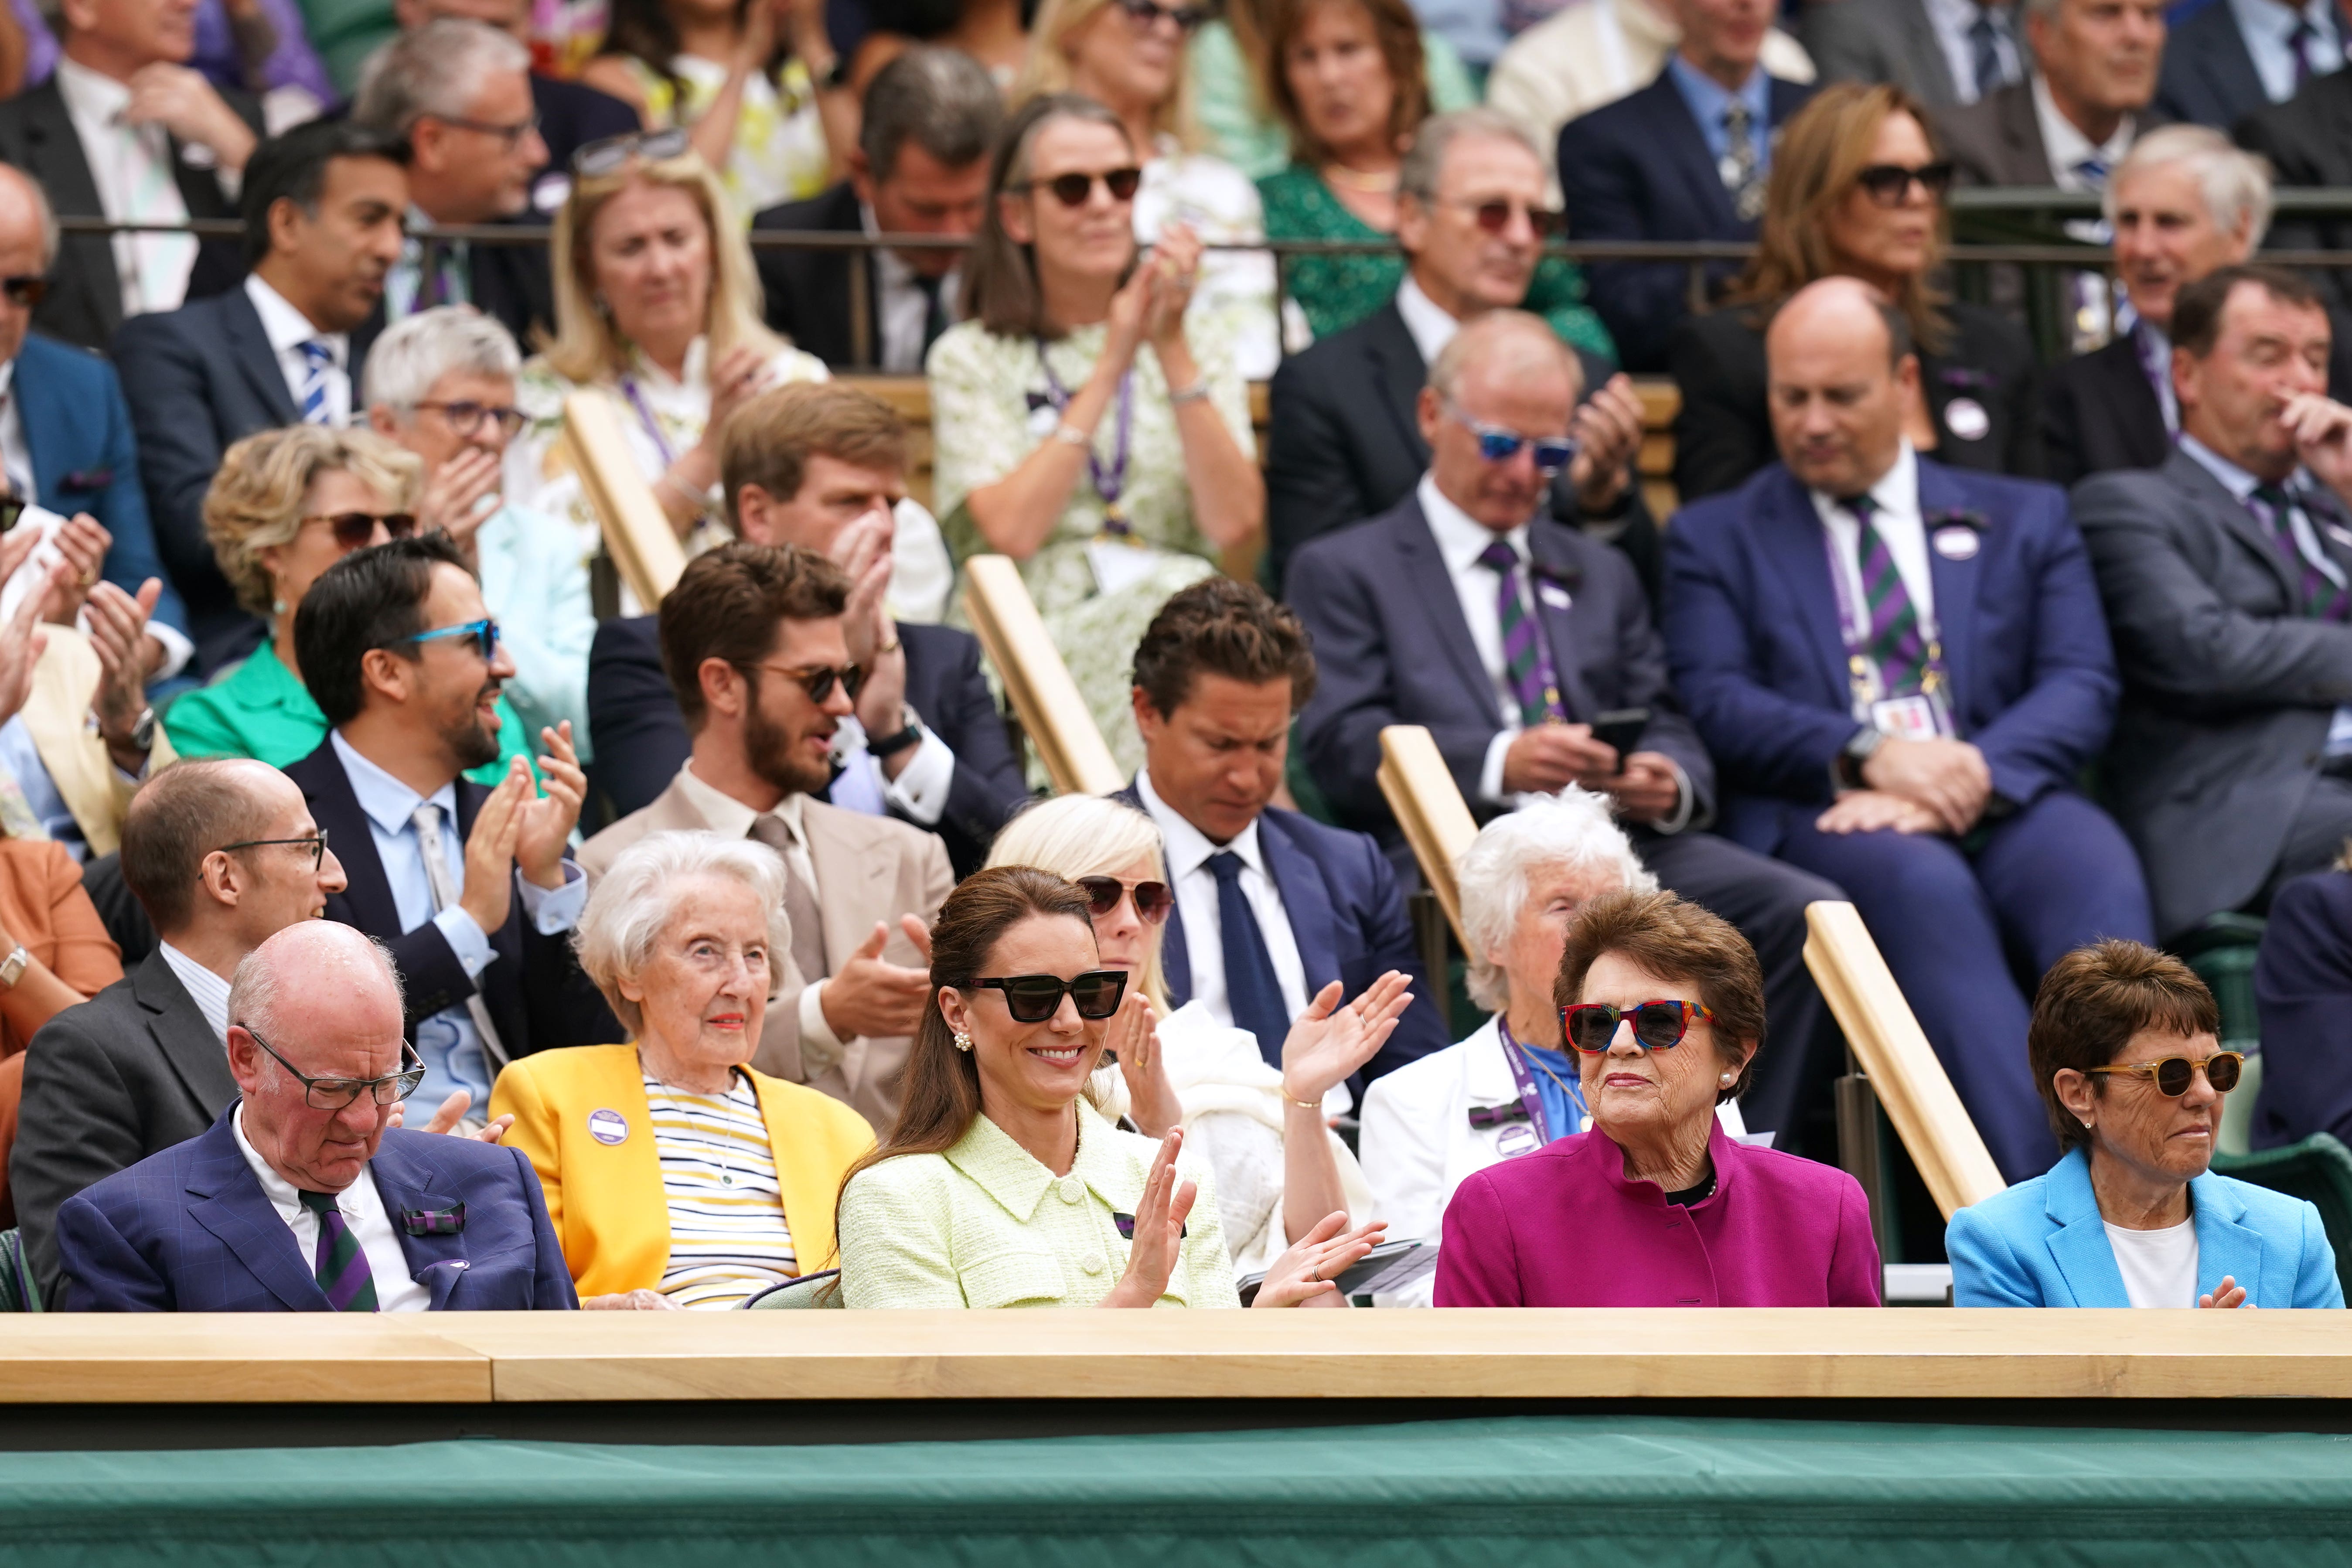 Kate watching Wimbledon ladies’ singles final from Royal Box The